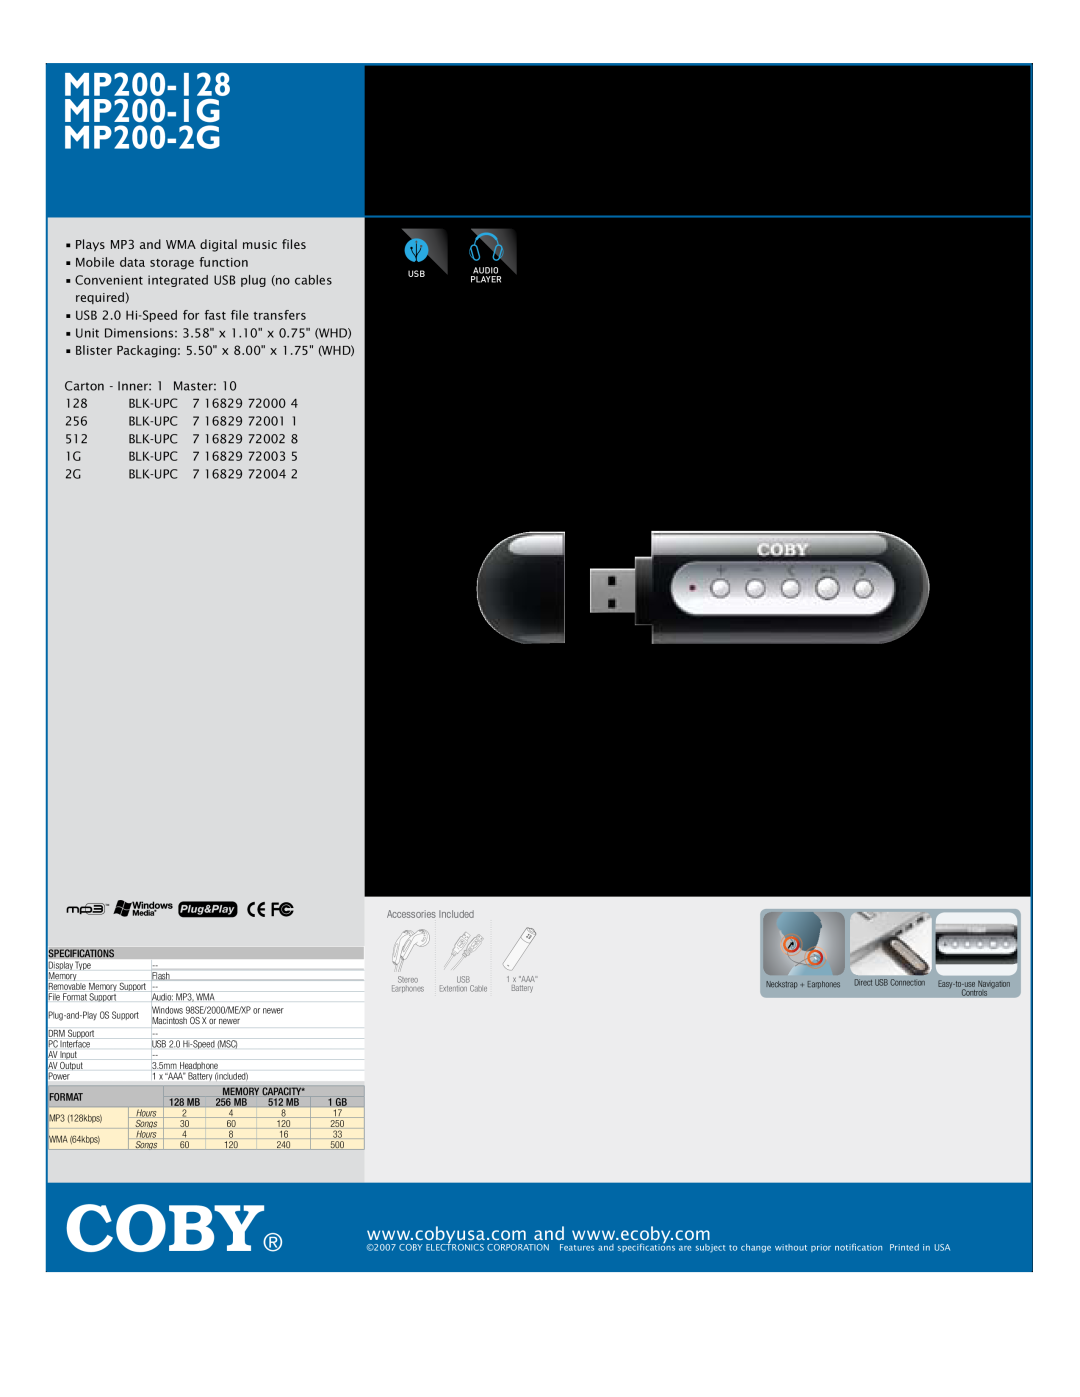 COBY electronic specifications Coby, USB-Stick MP3 Player, MP200-128 MP200-1G MP200-2G 